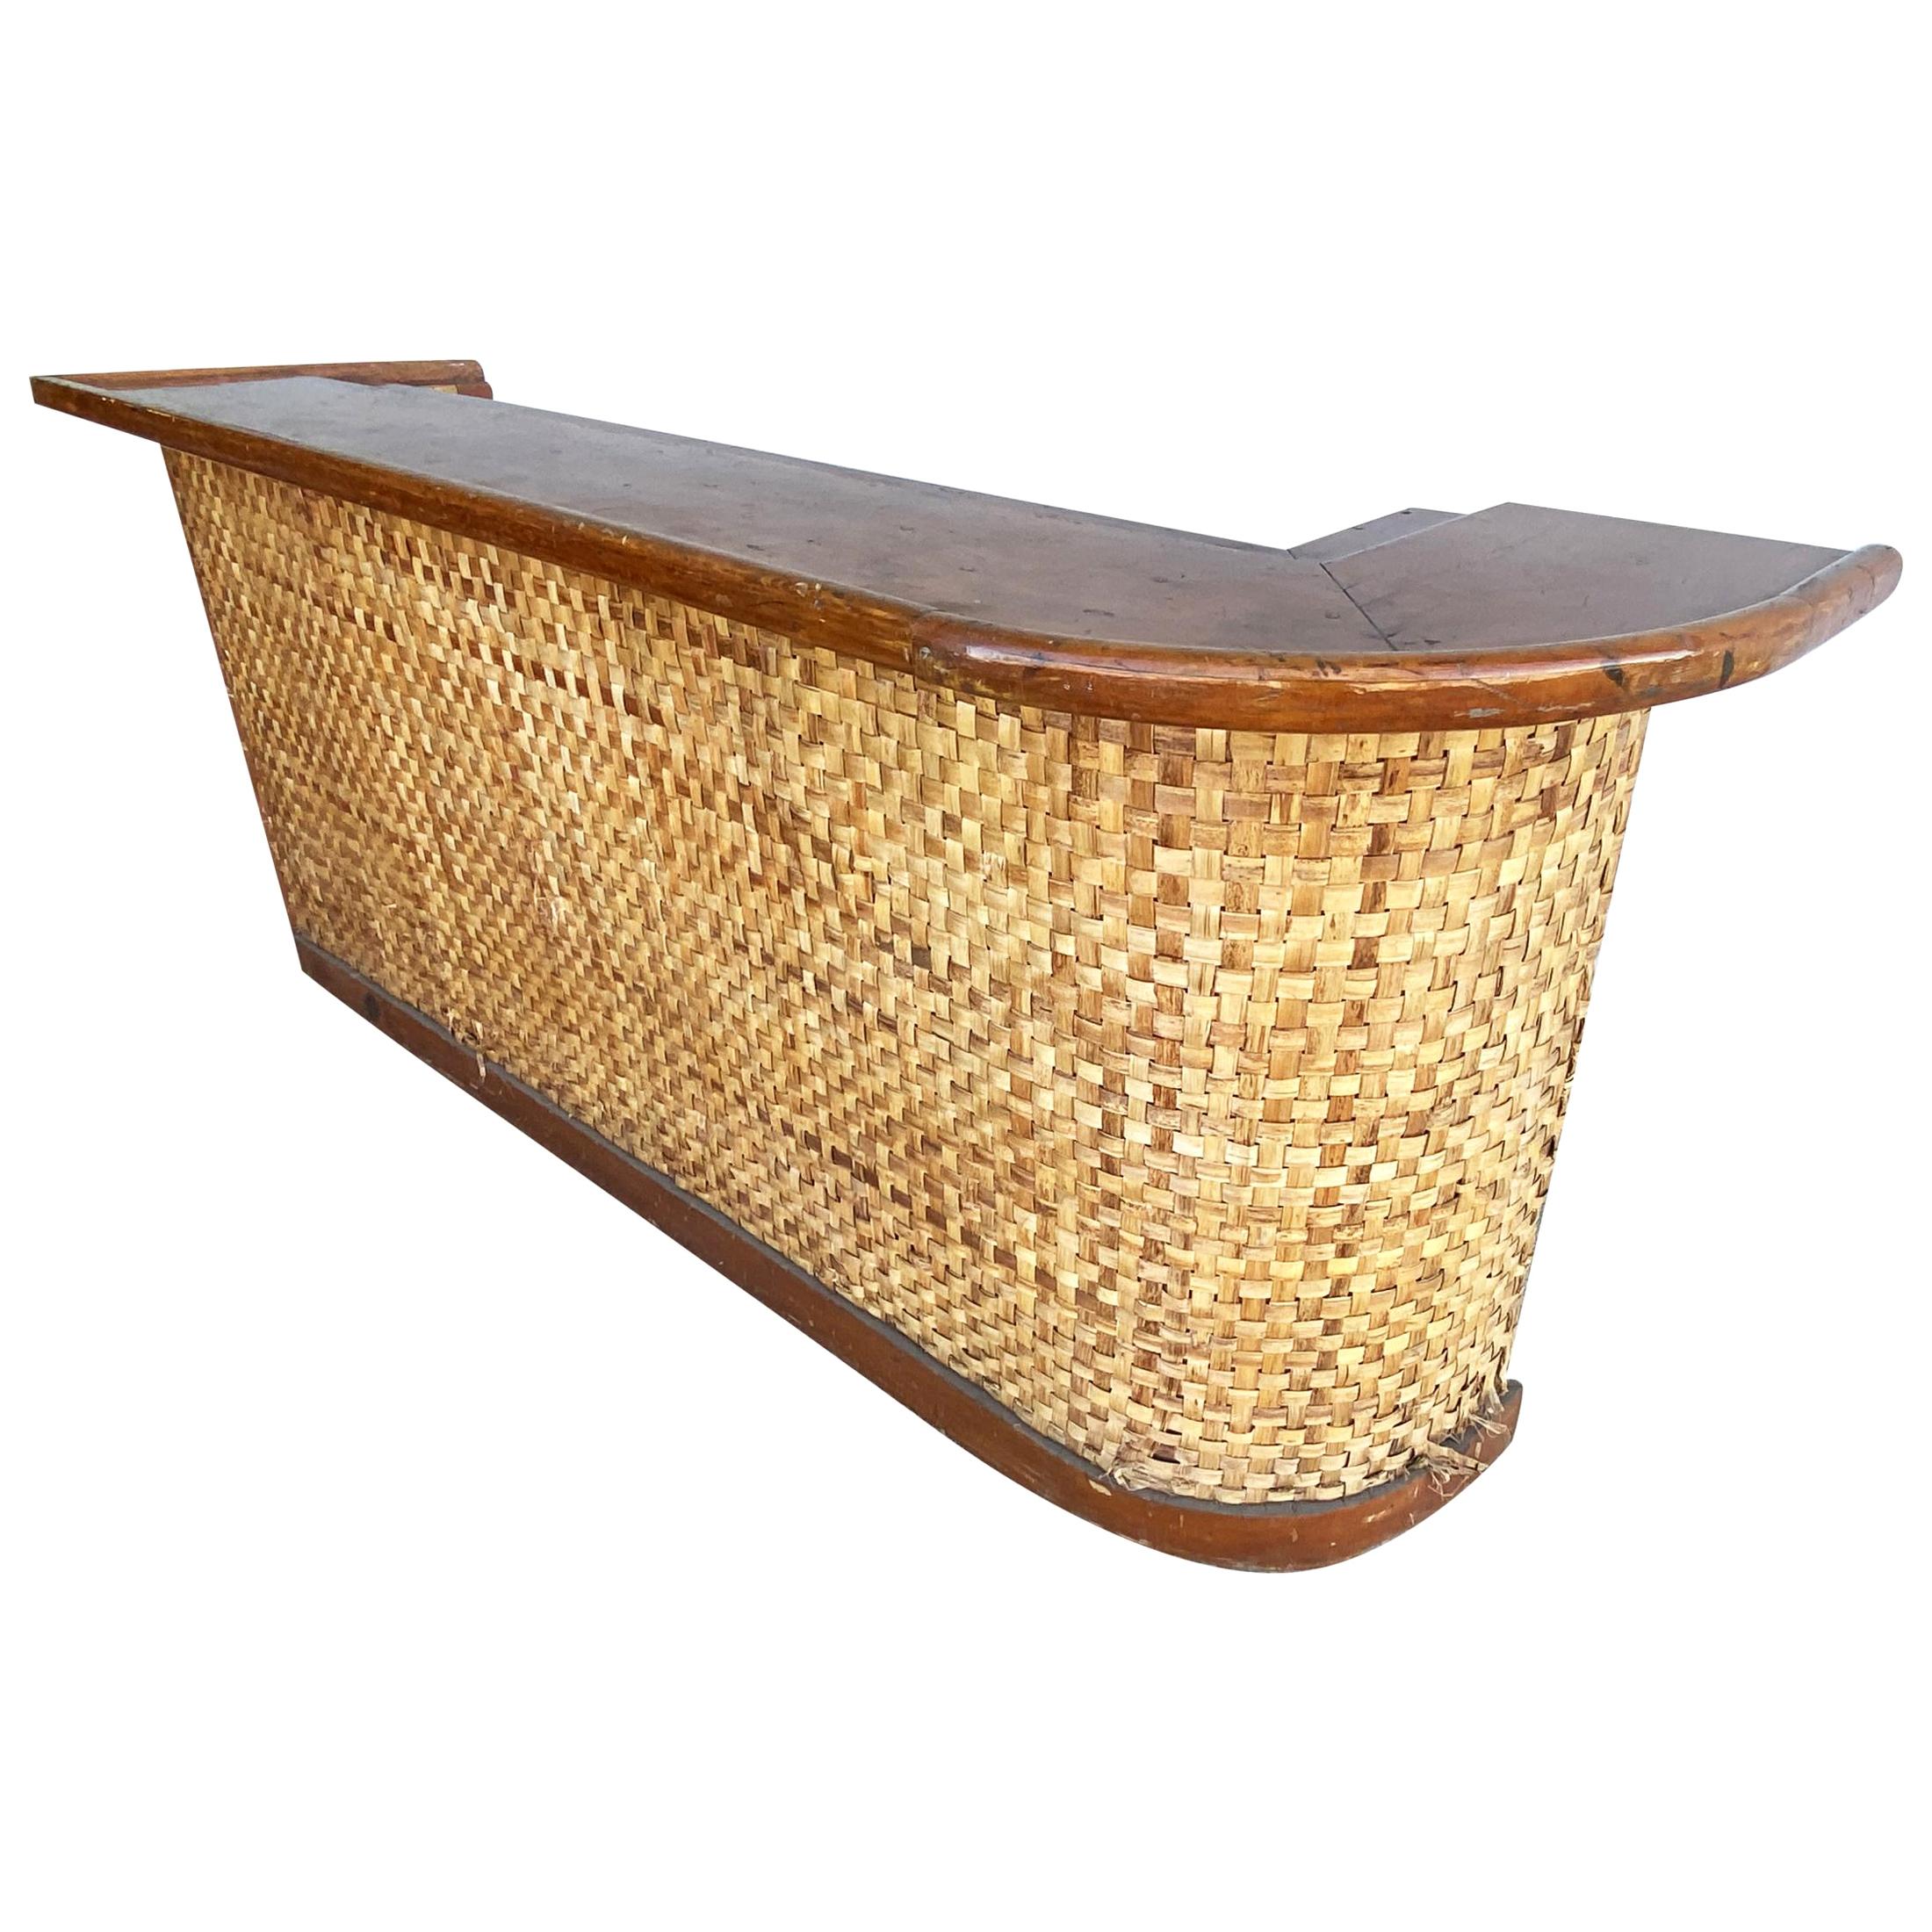 Restored Large 95" Tropical Mahogany Top Bar with Woven Wicker Front, Circa 1940